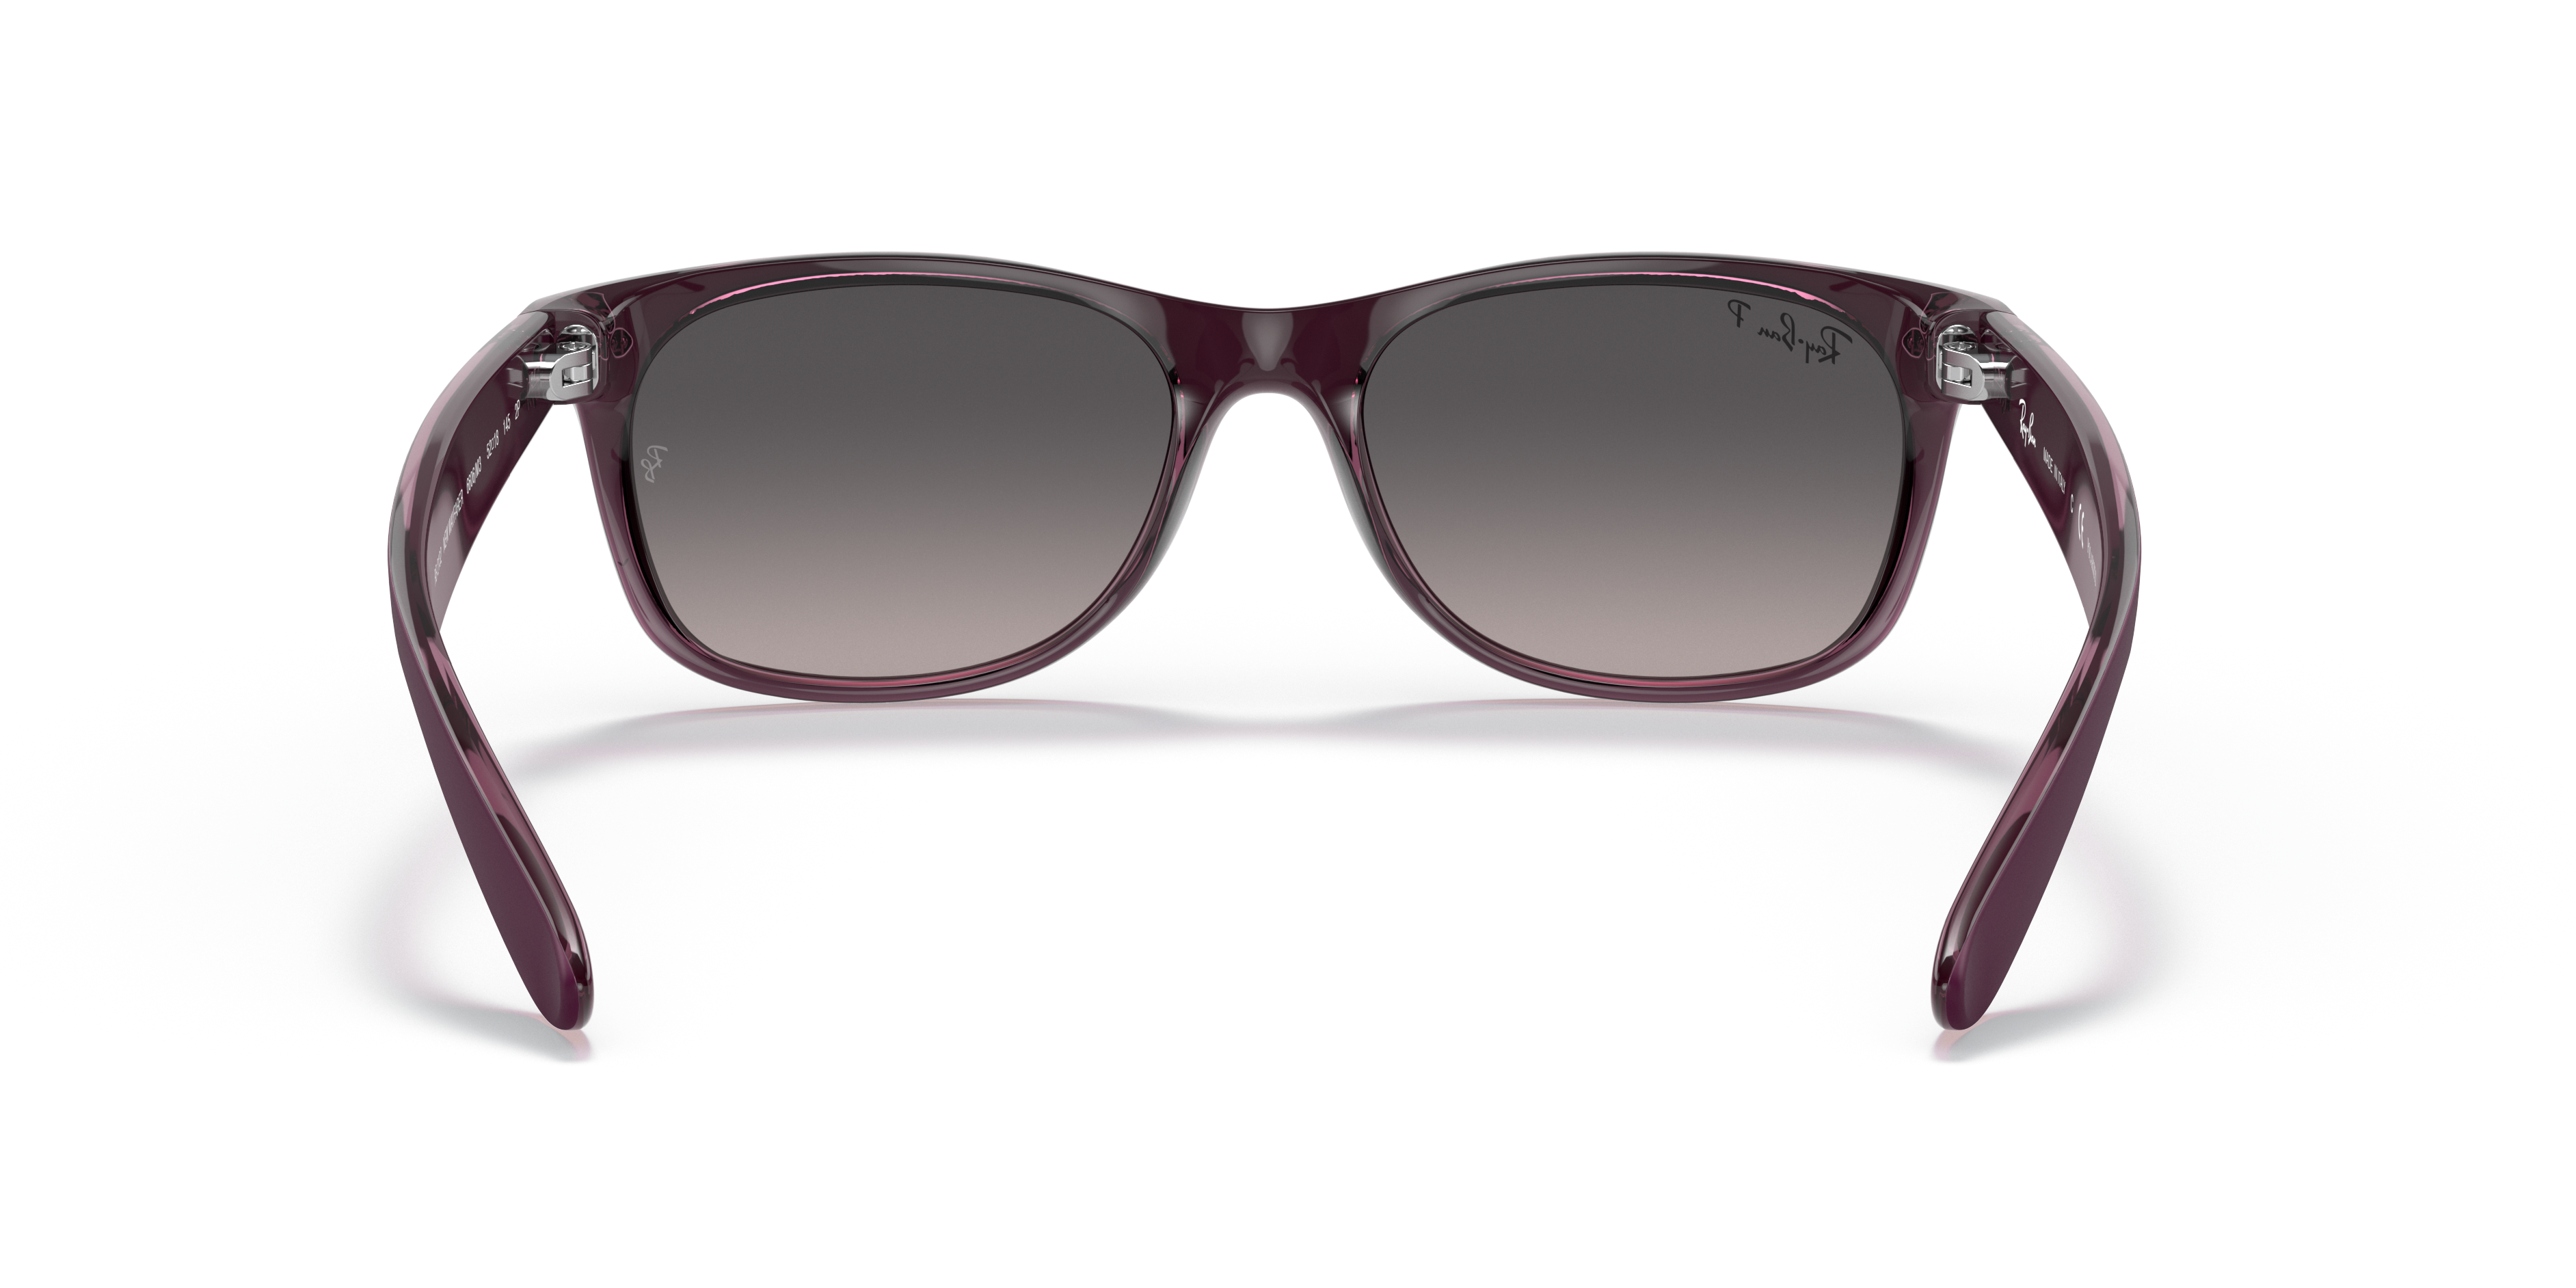 New Wayfarer Classic Sunglasses in Transparent Grey and Grey | Ray 